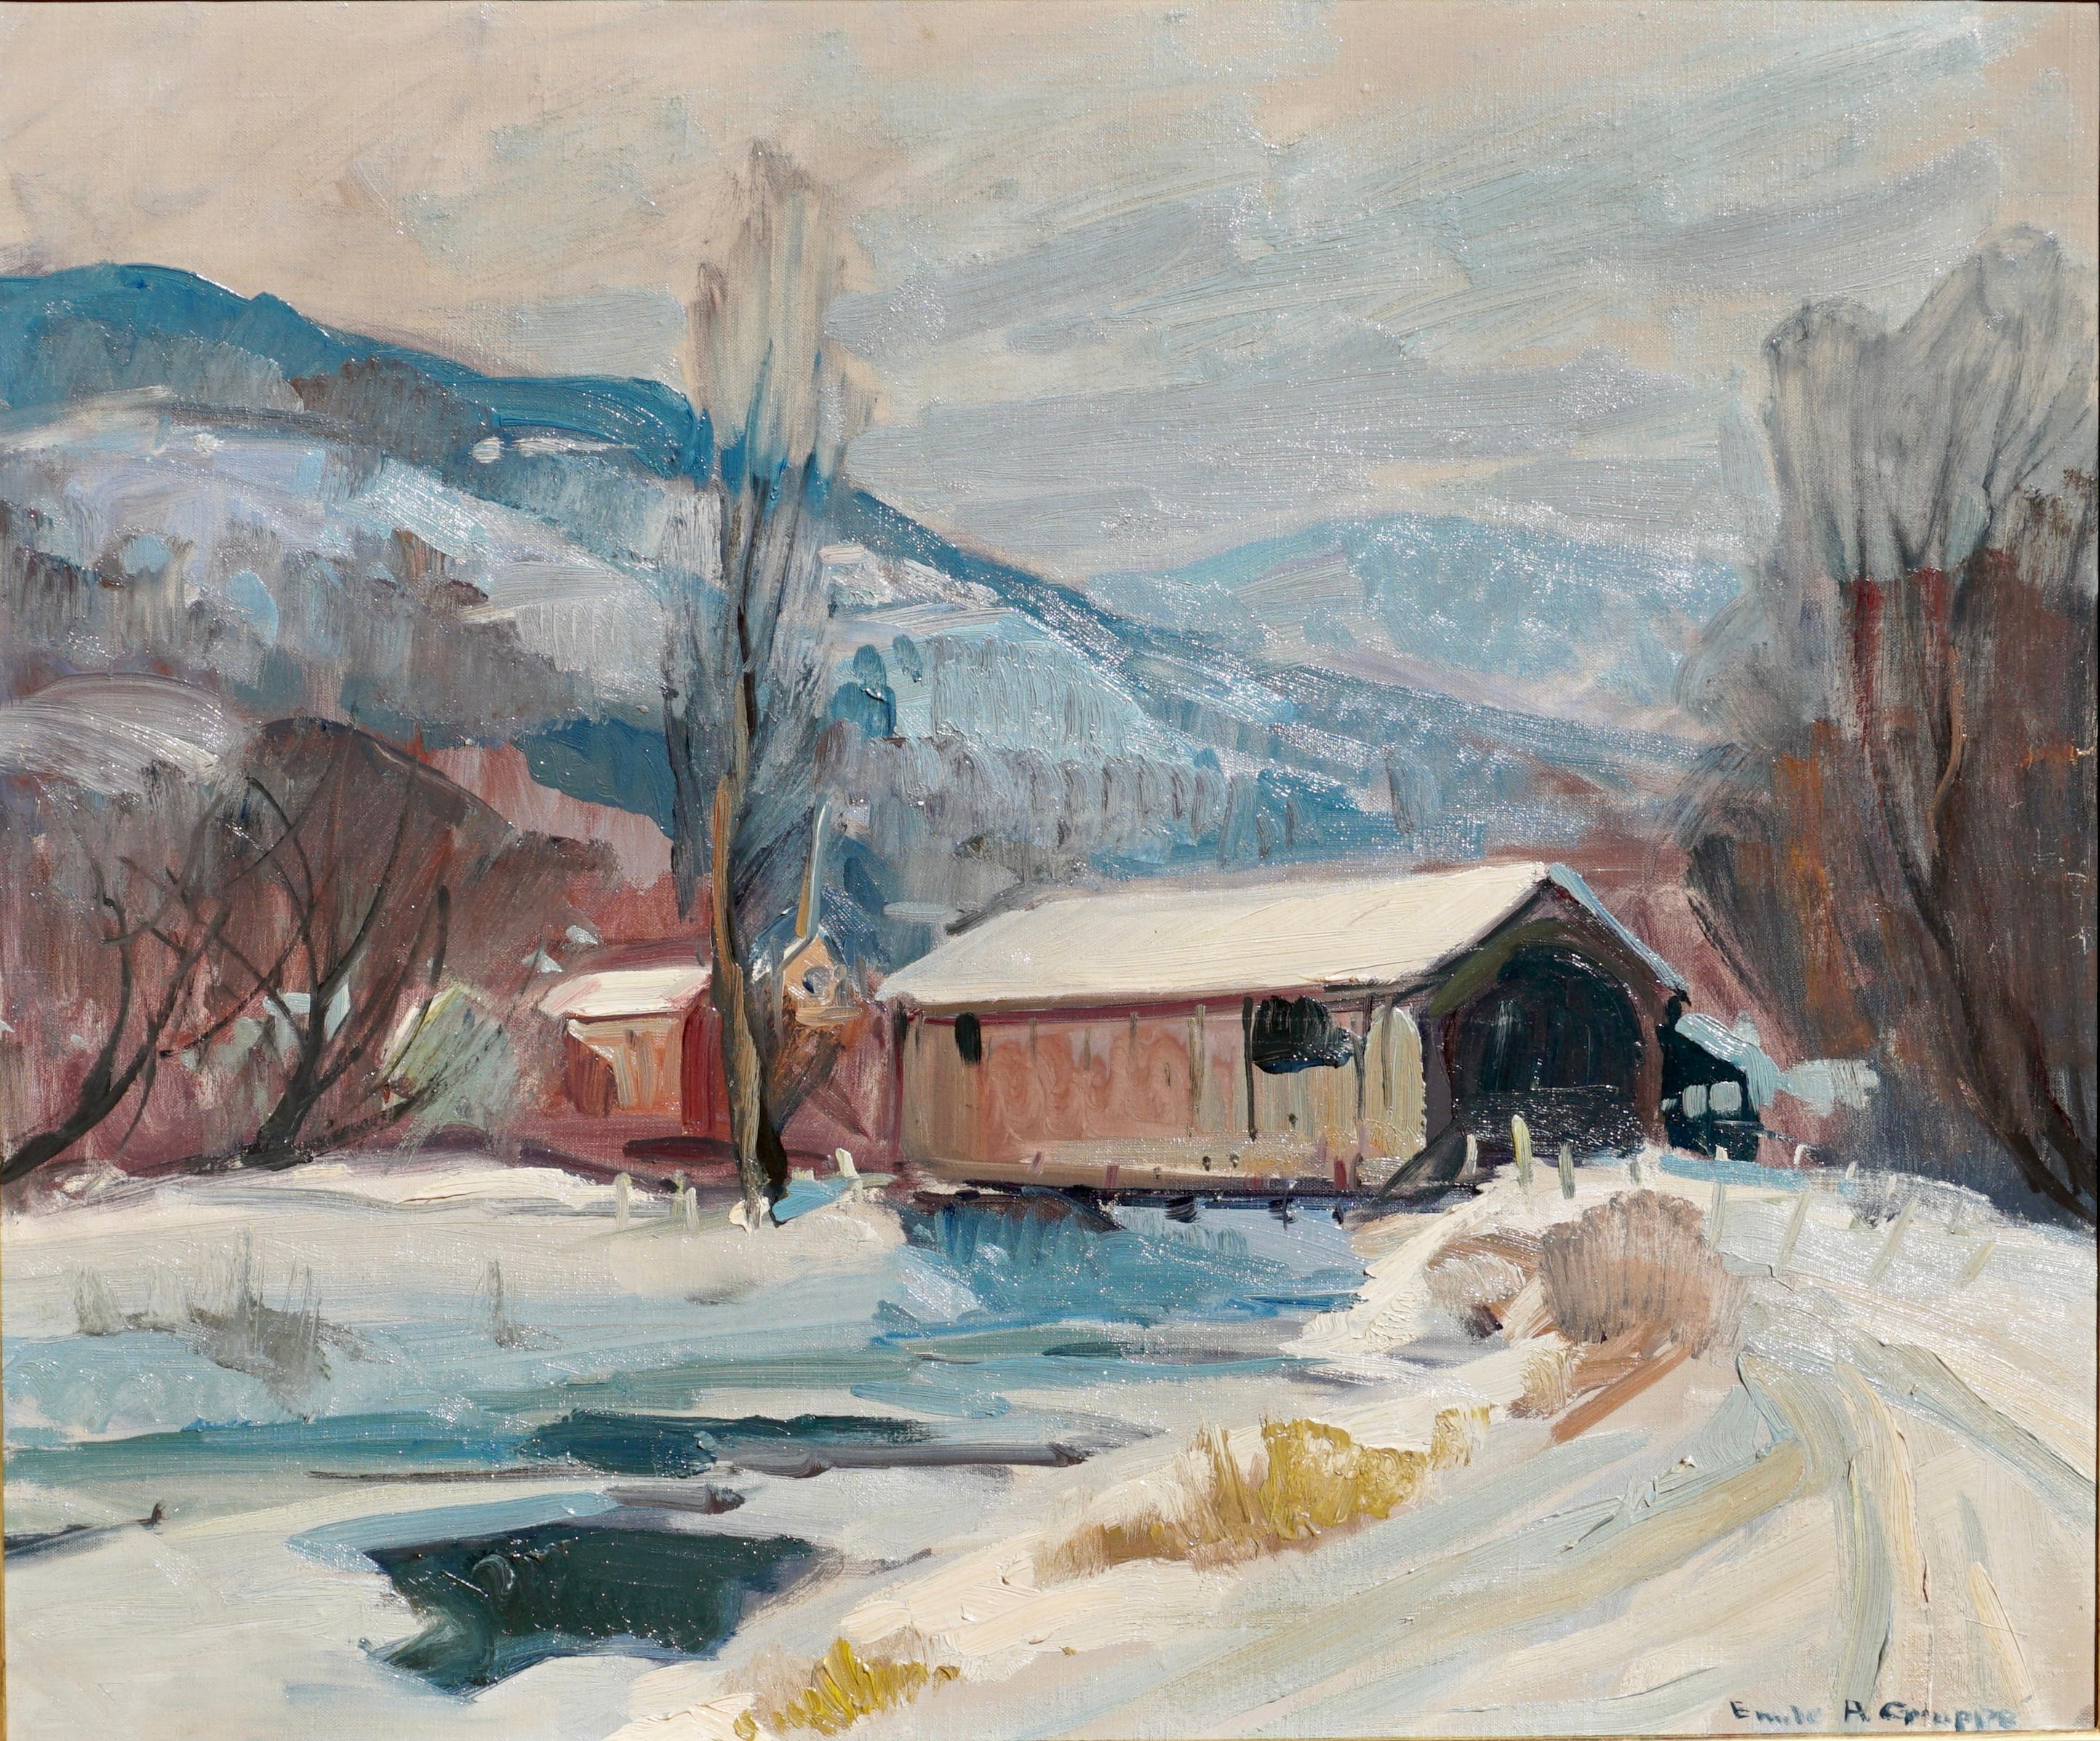 Emile Albert Gruppe 'Mass 1896-1978' “Covered Bridge” Snow Painting For Sale 3